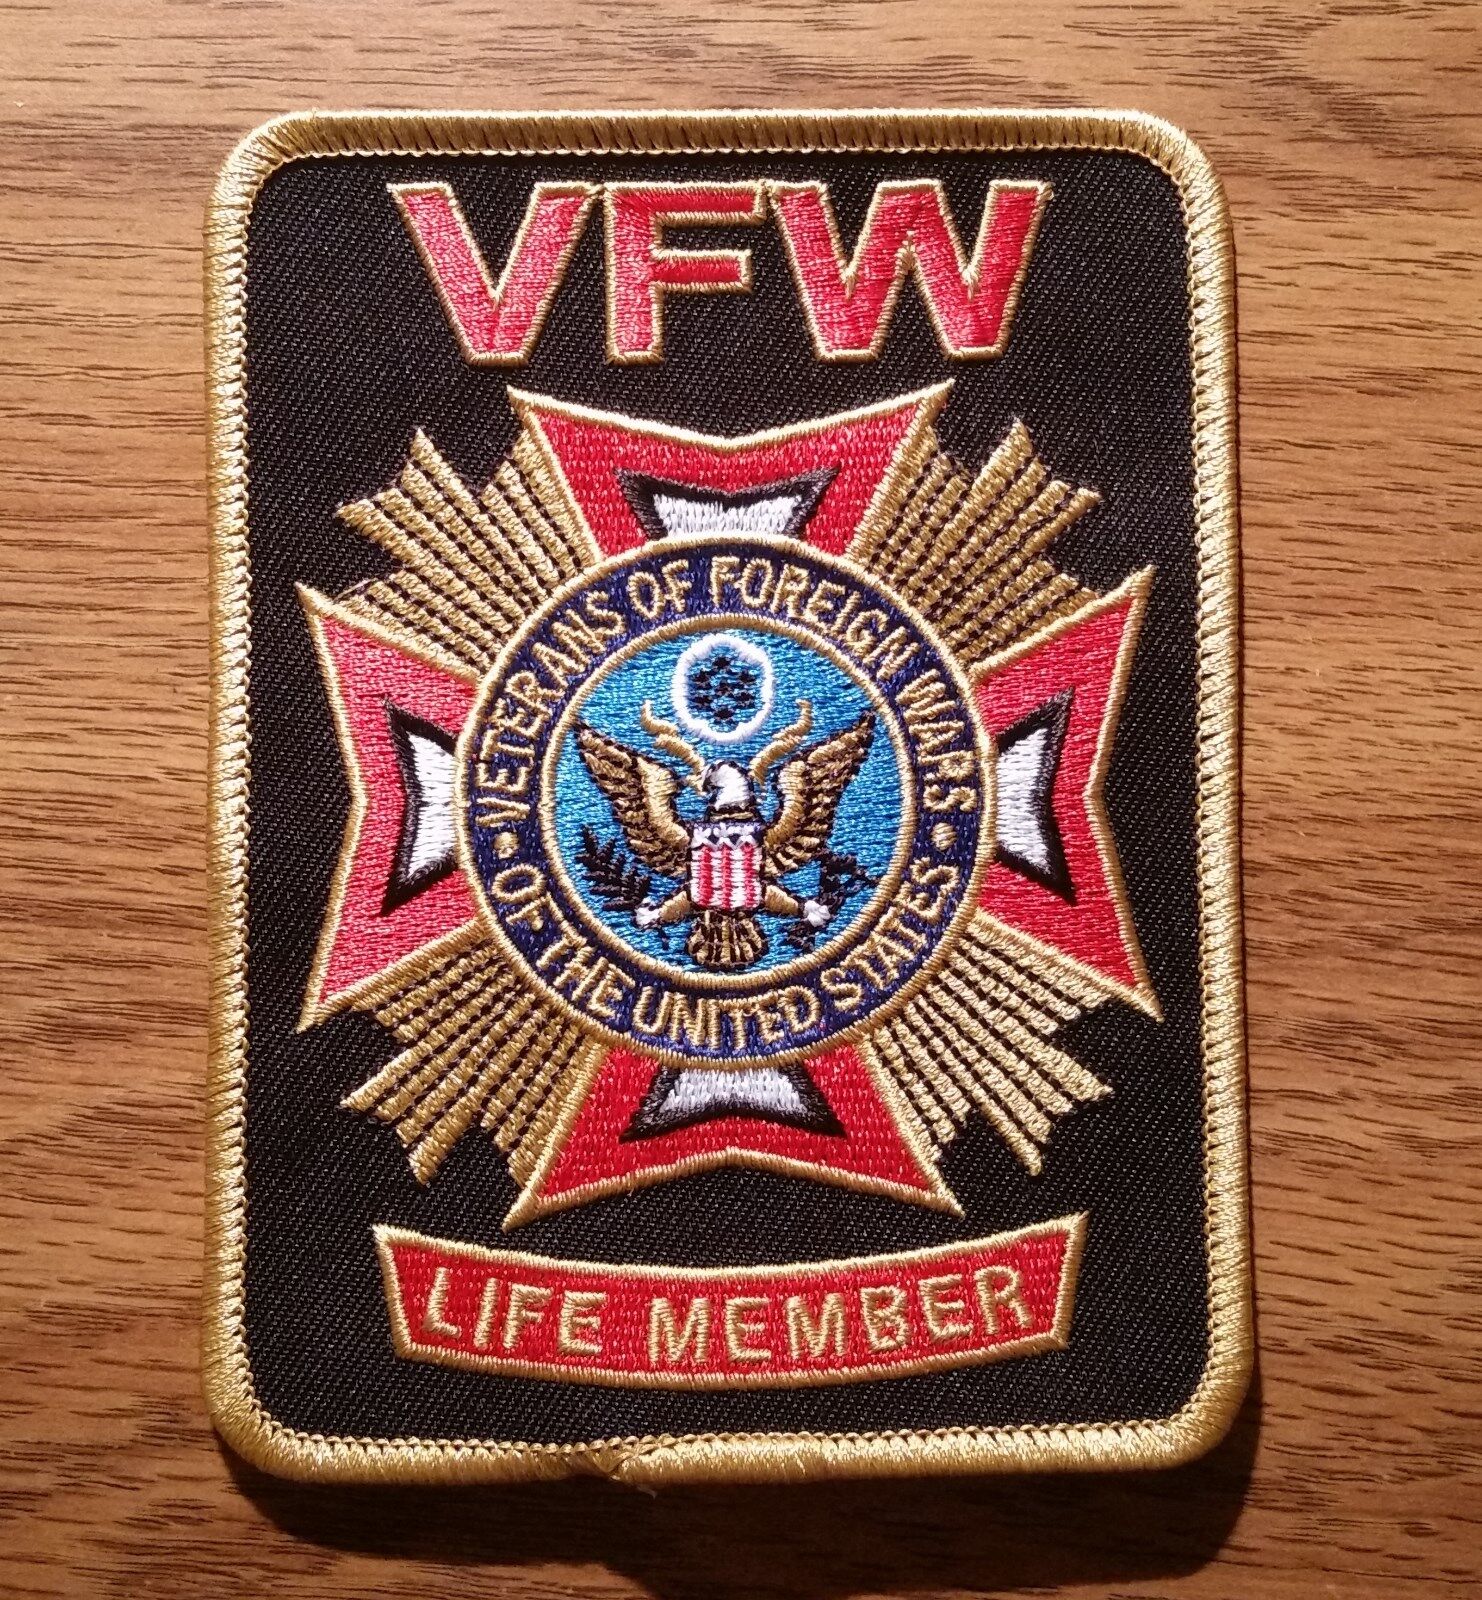 Veterans of Foreign Wars (VFW Life Member) Embroidered Black Patch - New Style